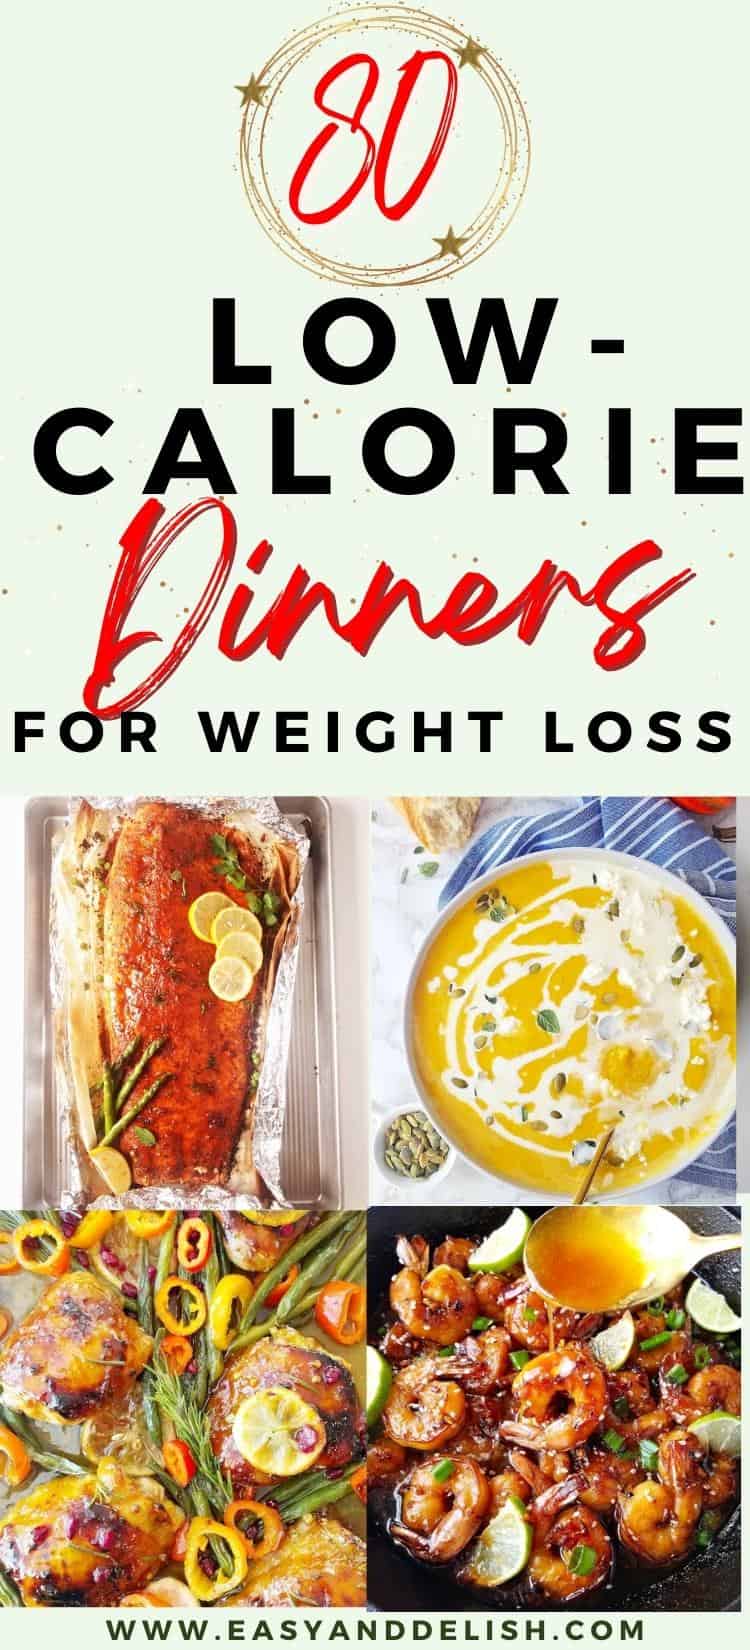 image collage showing several of the 80 low calorie dinners for weight loss.